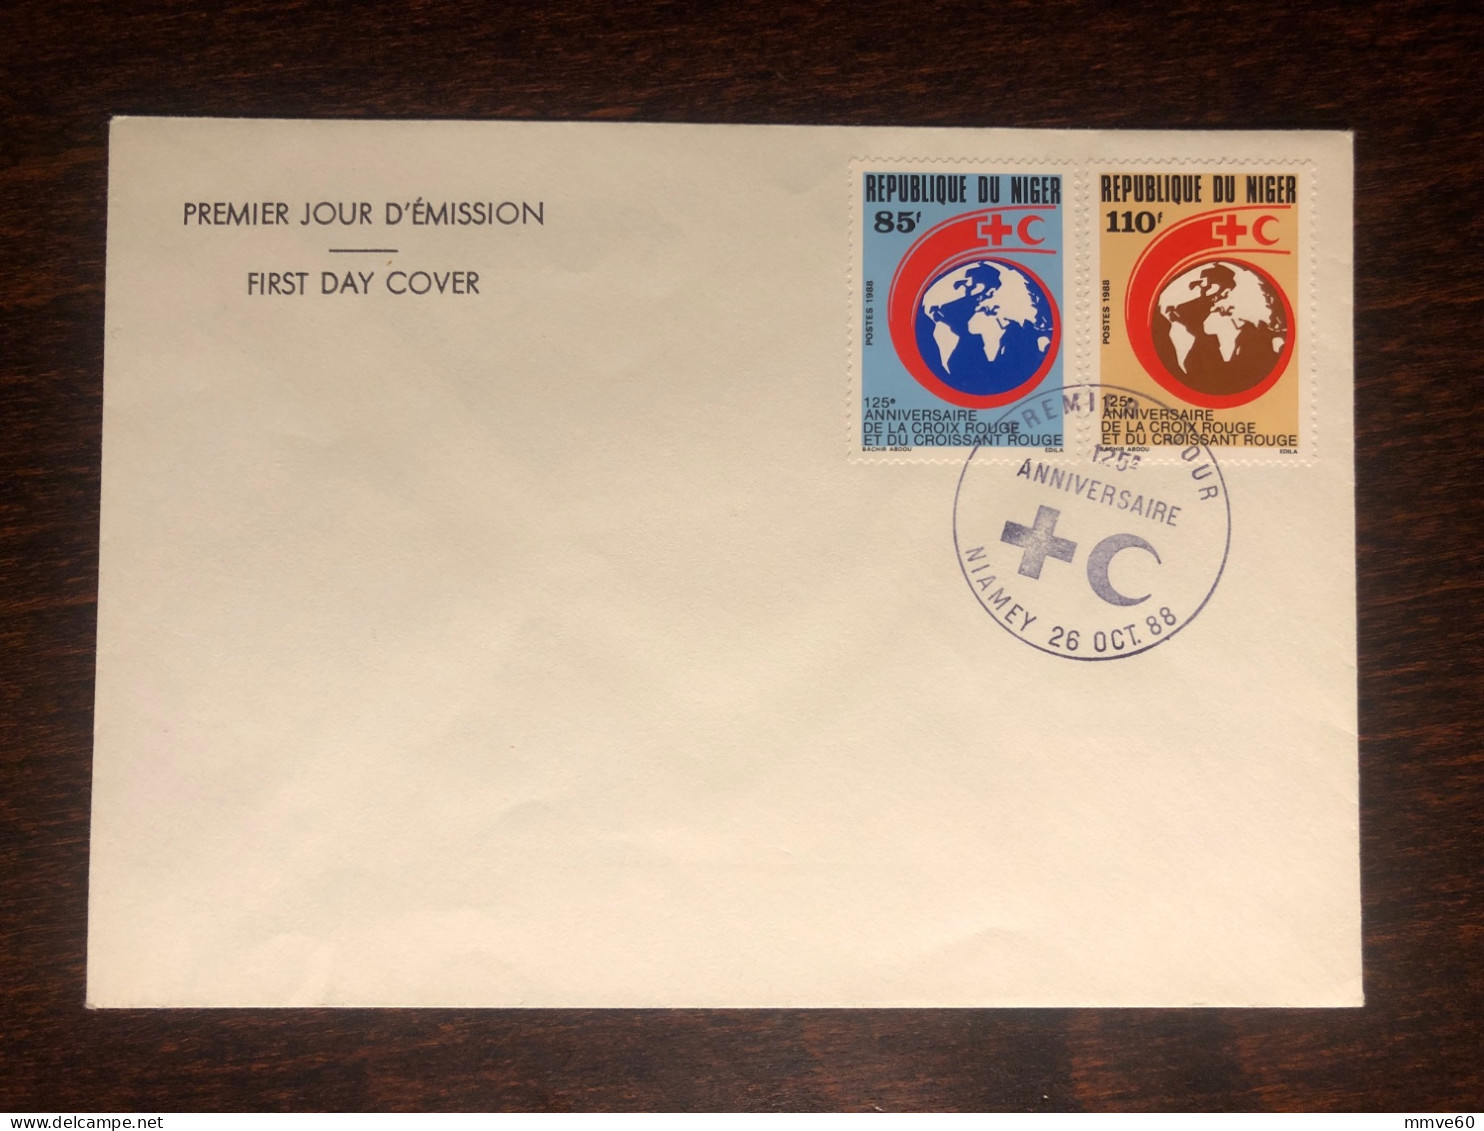 NIGER FDC COVER 1988 YEAR RED CROSS HEALTH MEDICINE STAMPS - Níger (1960-...)